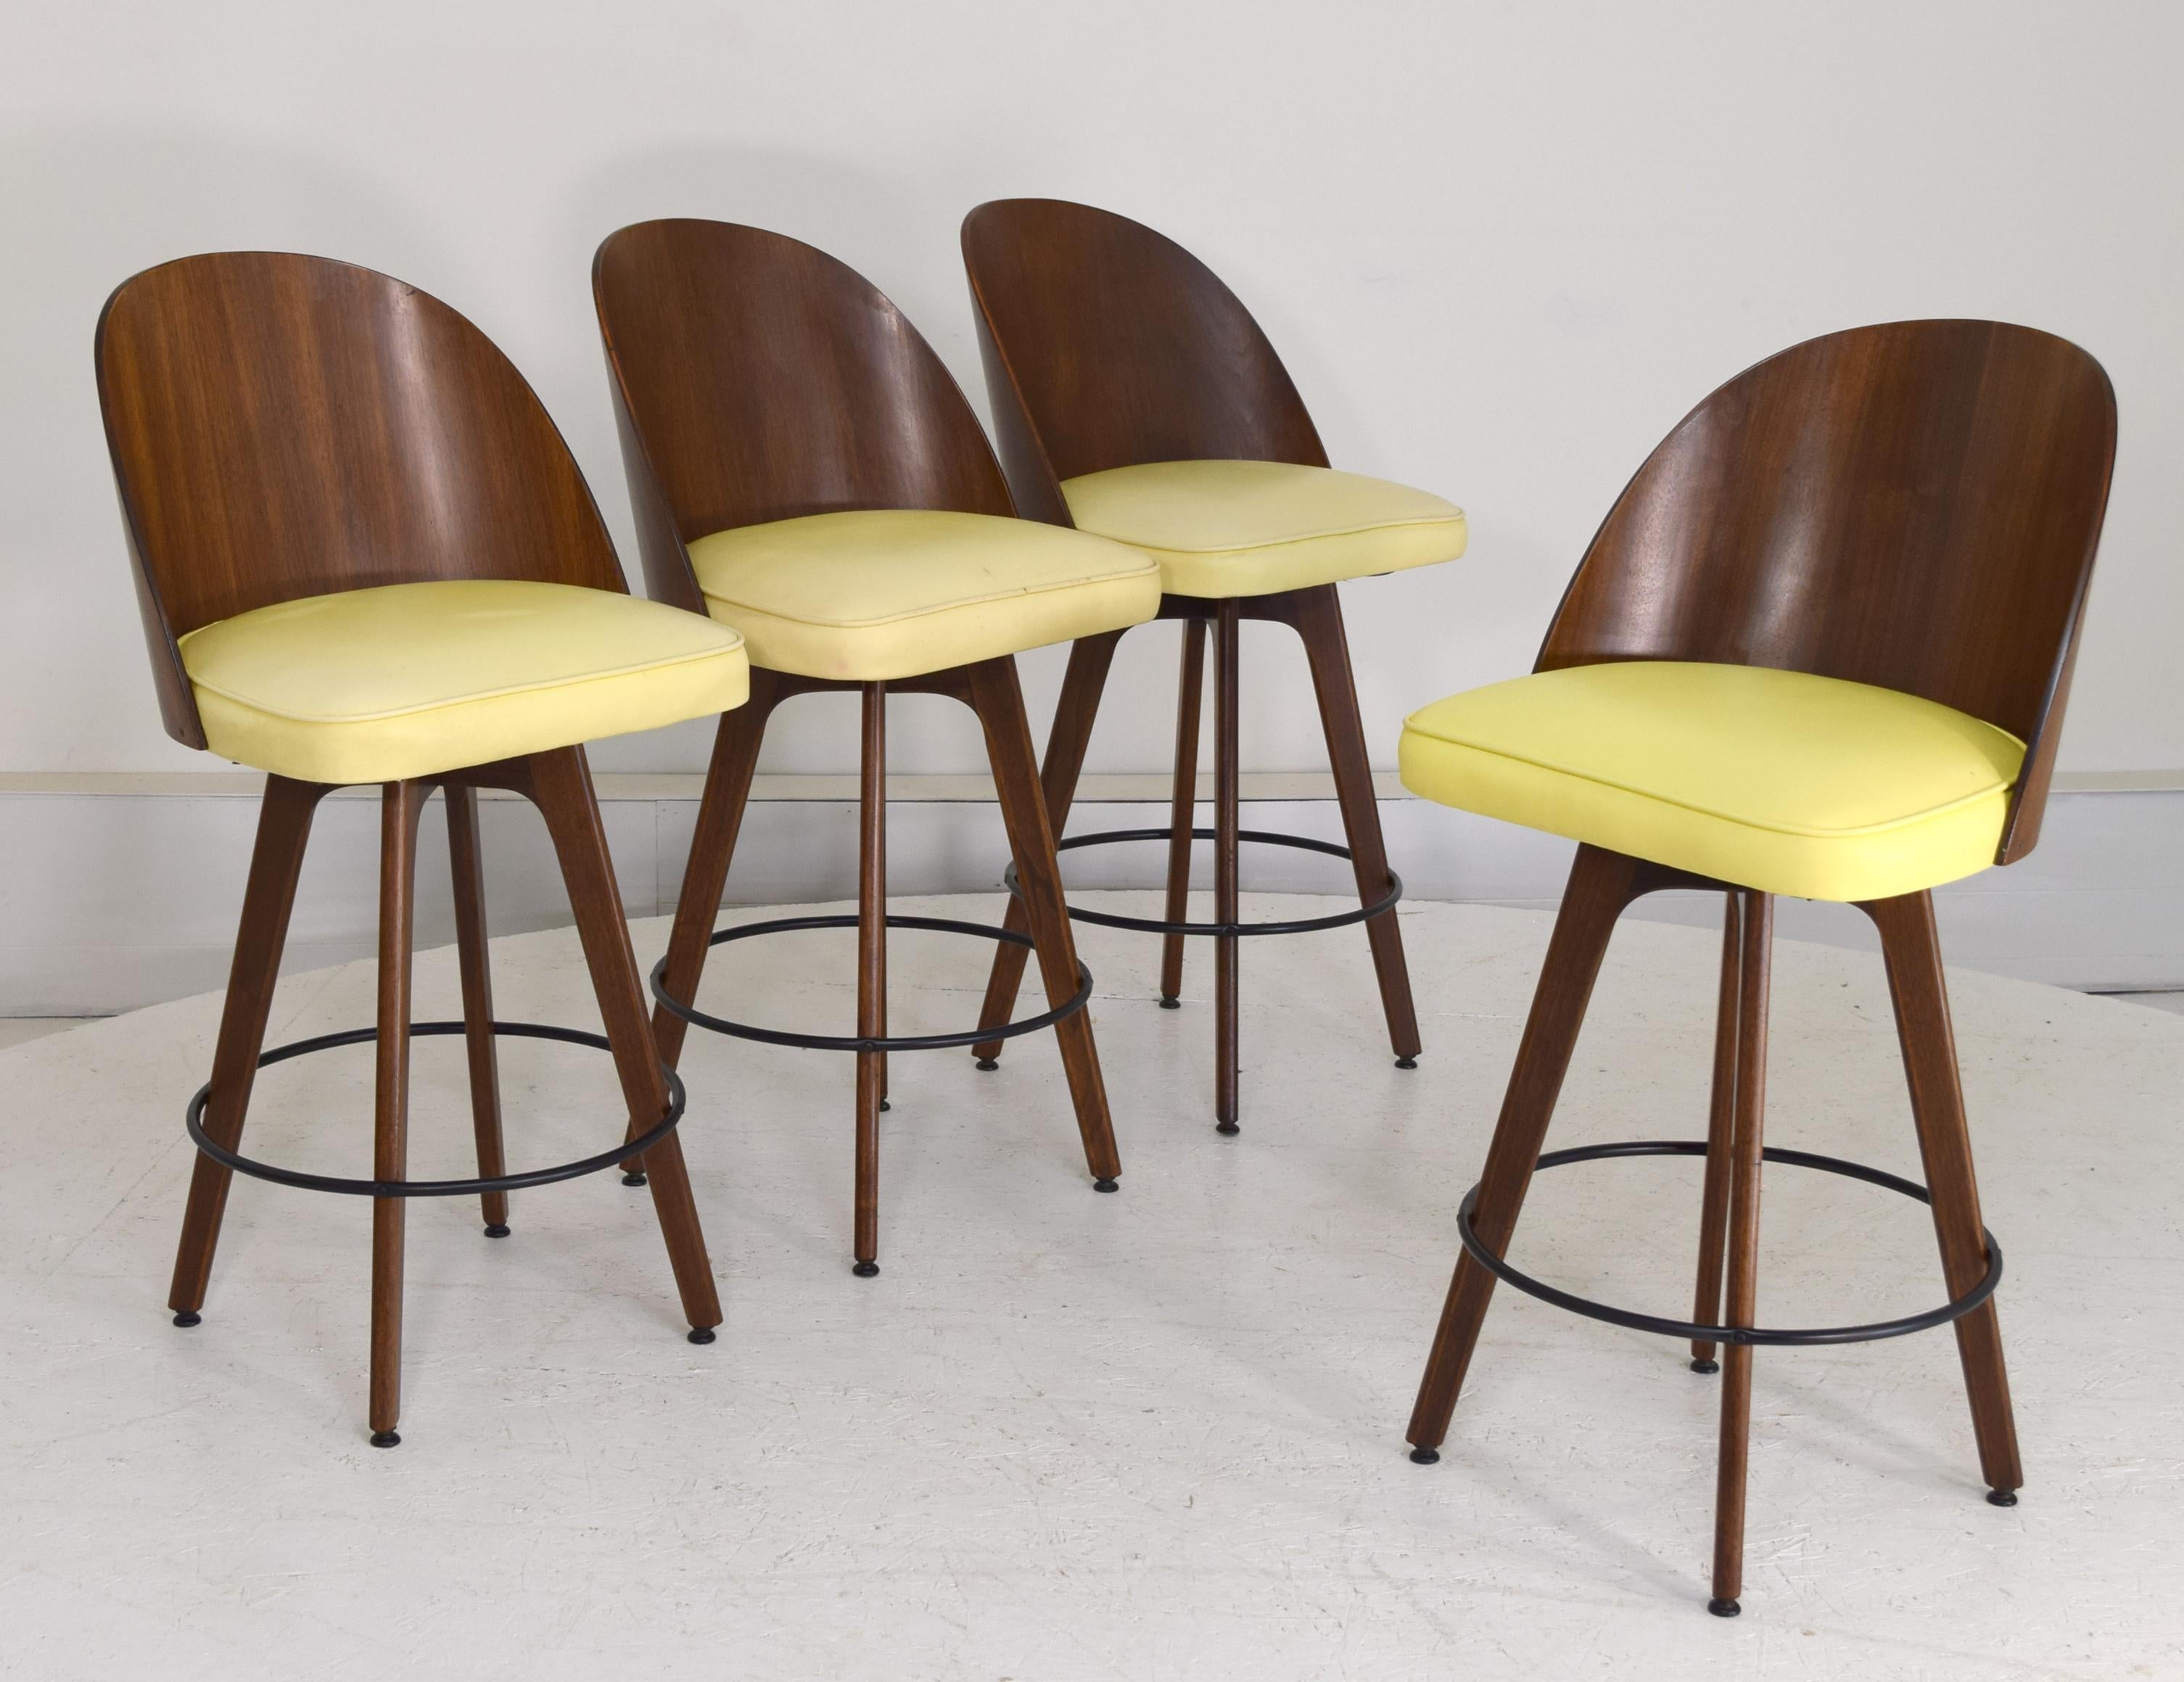 Set of 4 bar stools with swivel mechanisms produced with solid walnut leg bases and walnut plywood arched backs. Exceptional Mid century Modern design with these backs being a rare and sought-after form of the bar stools produced by the company. All